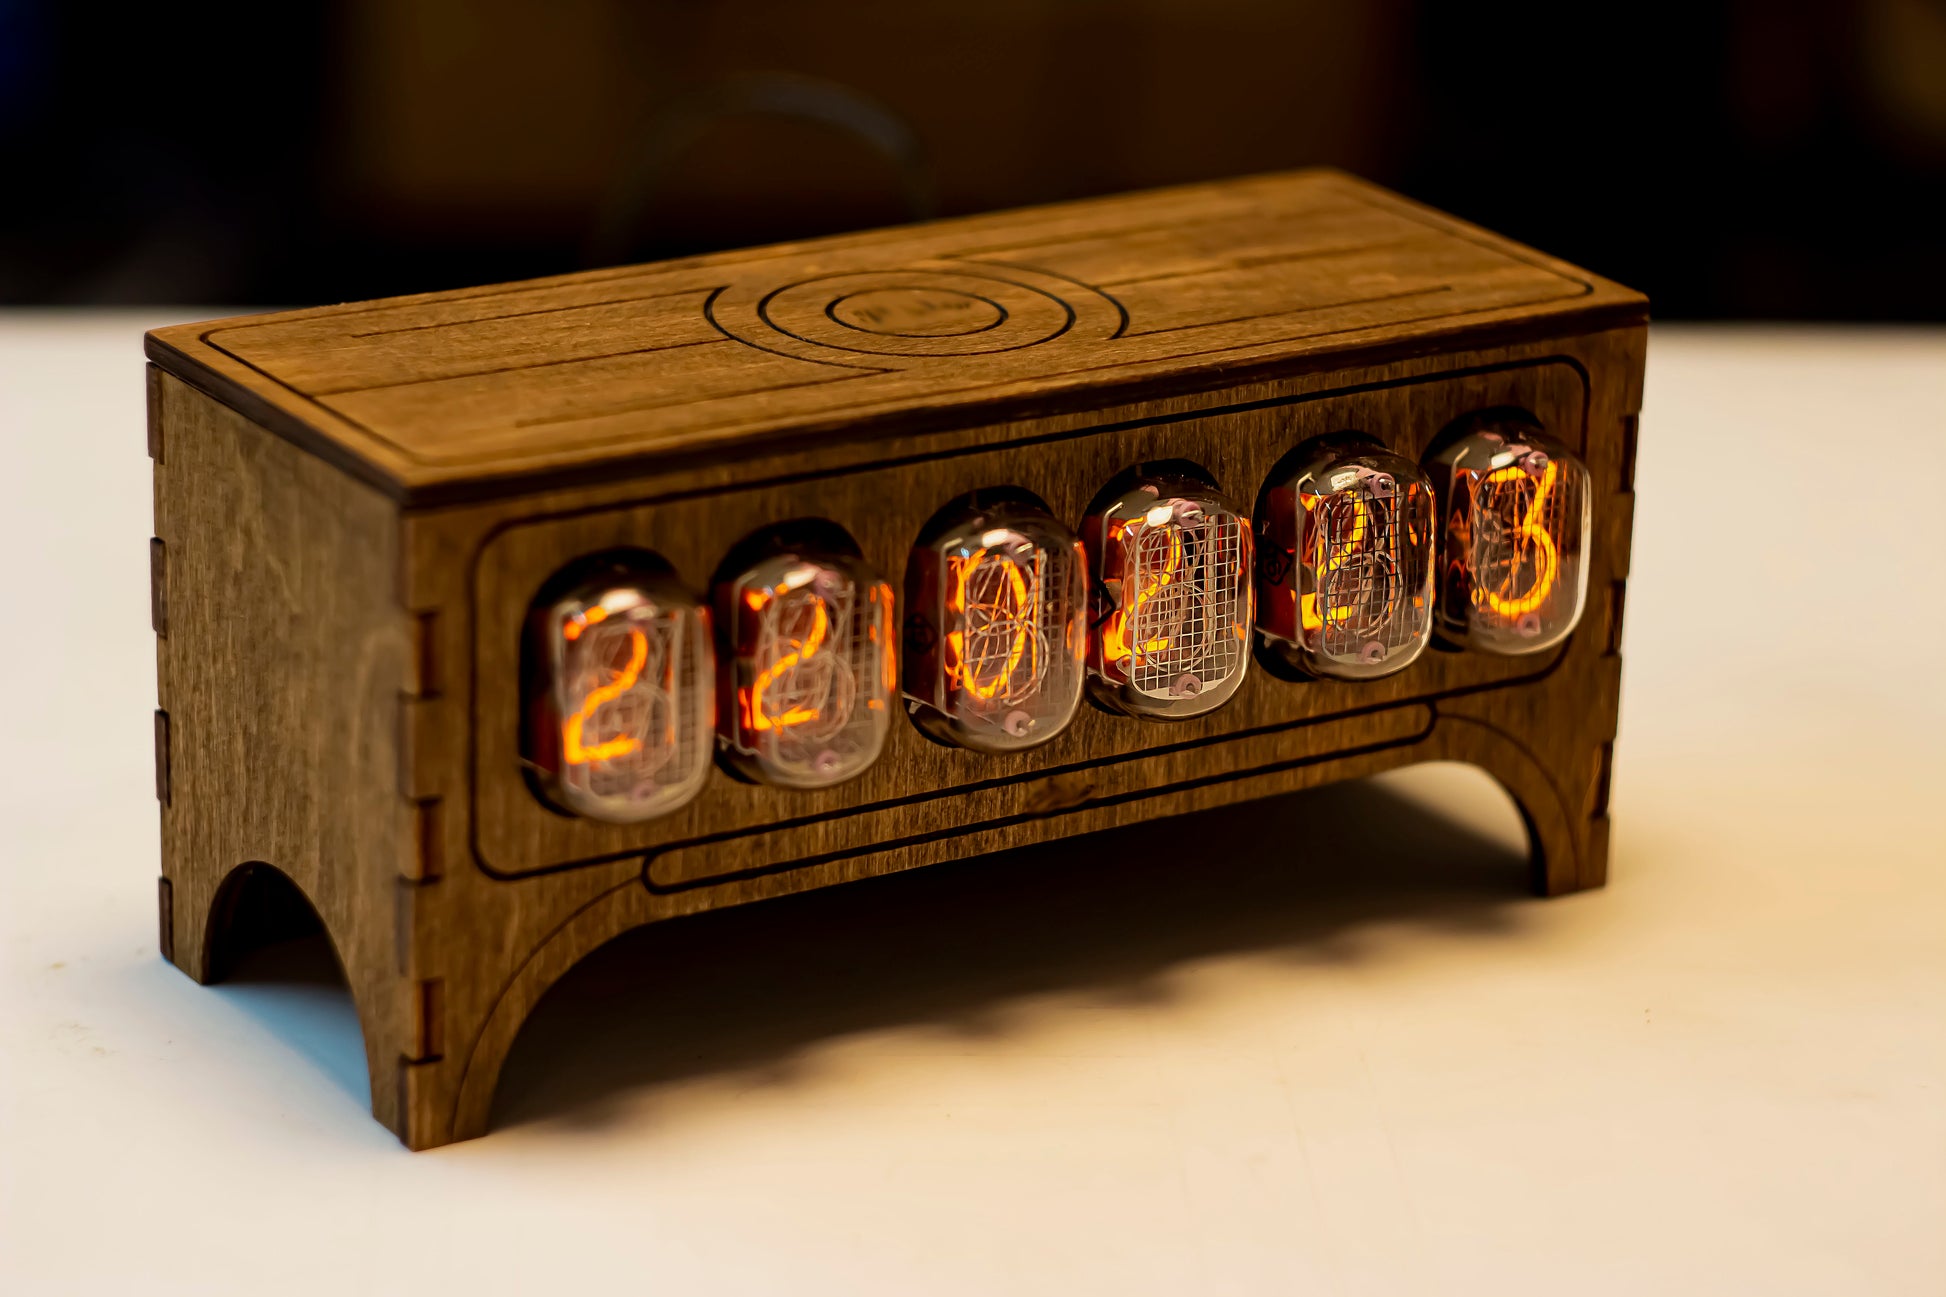 Nixie Tube Clock IN12 Bedroom clock Bedside Wooden Home Decor Table Clock Gift Christmas Boyfriend Gift For Him - JTNLAB